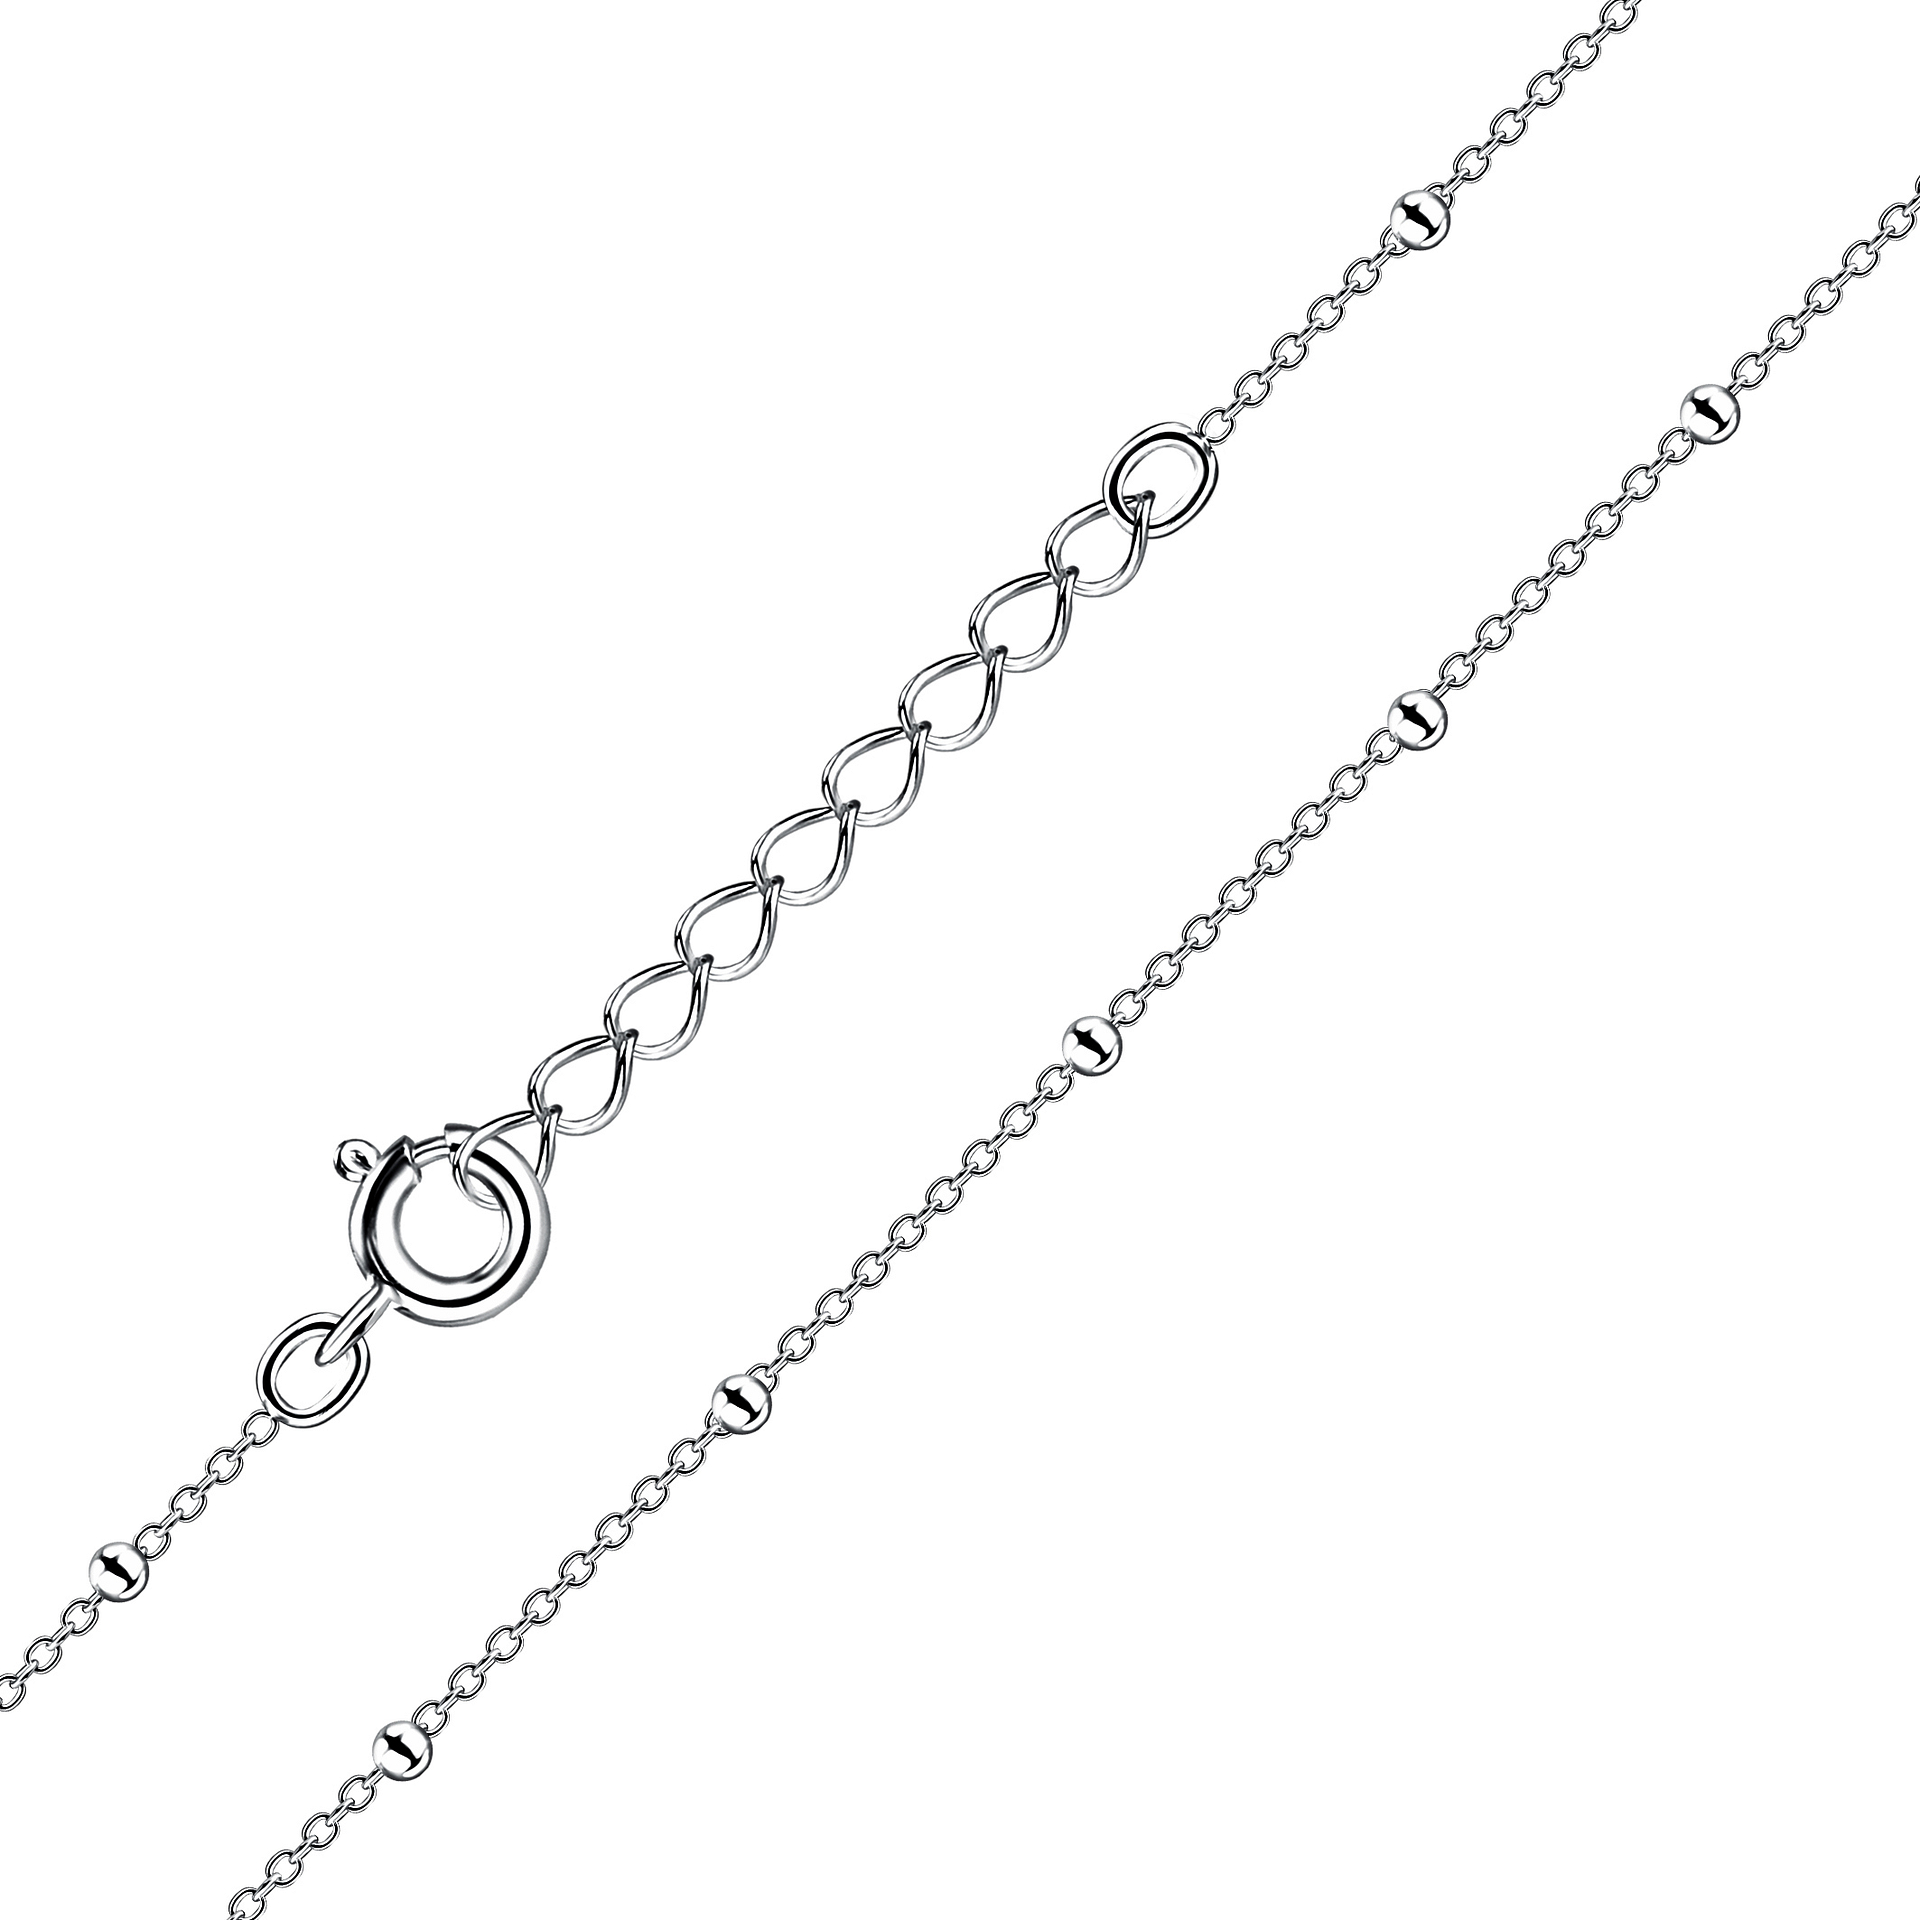 WHOLESALE 5PC 925 SOLID STERLING SILVER PLAIN CHAIN LOT Ey934 